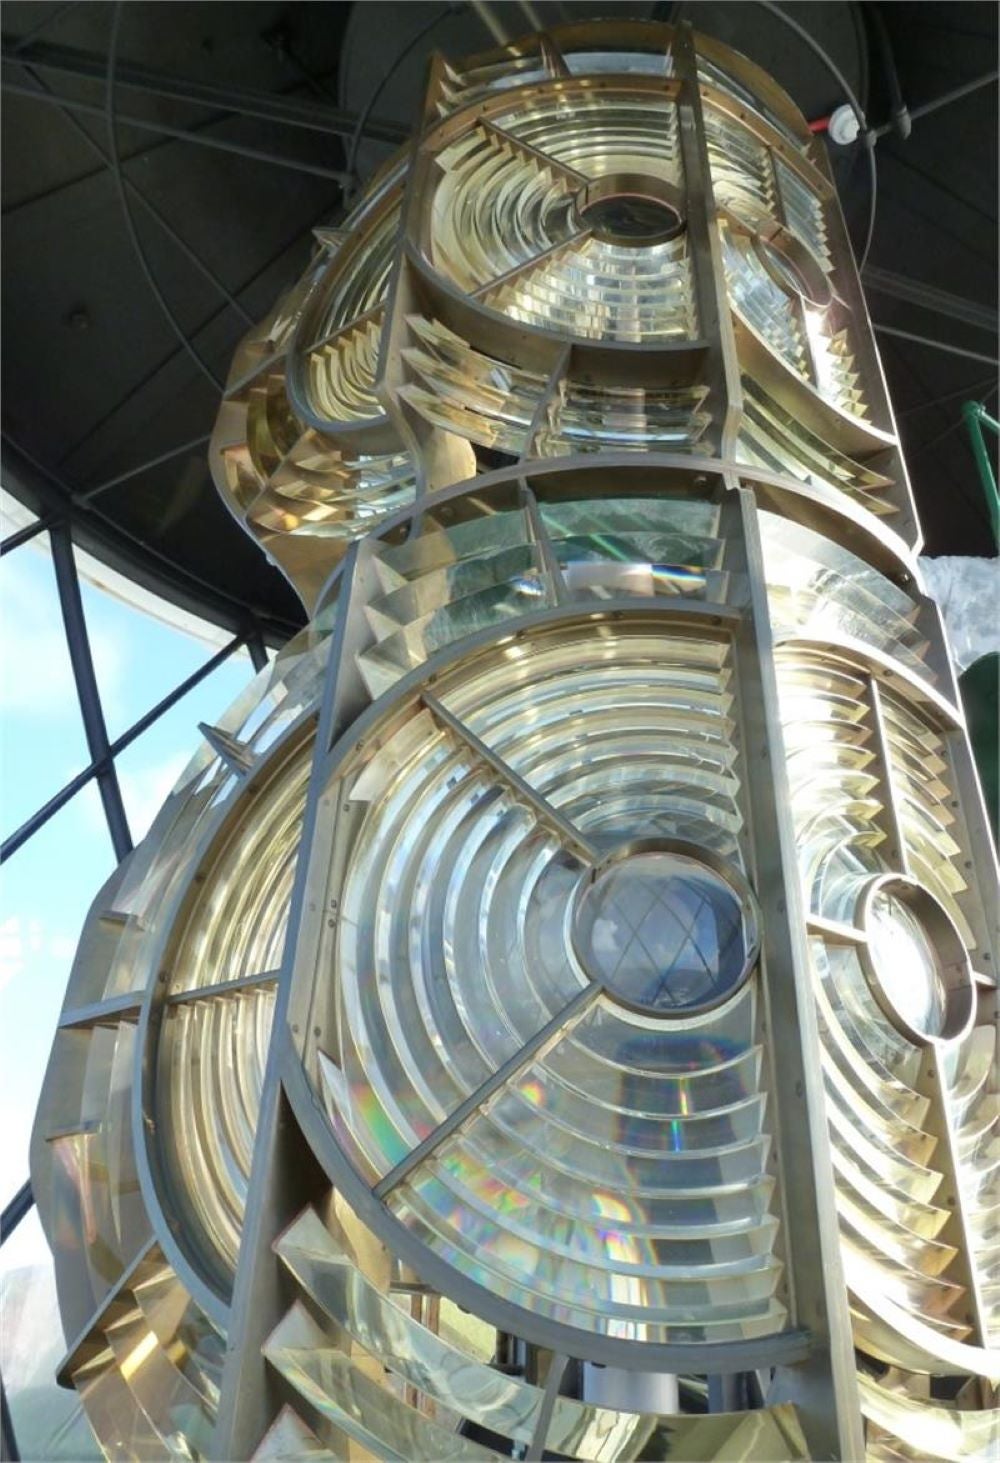 The two-tonne lamp is worth around £1 million (Devon and Cornwall Police/PA)